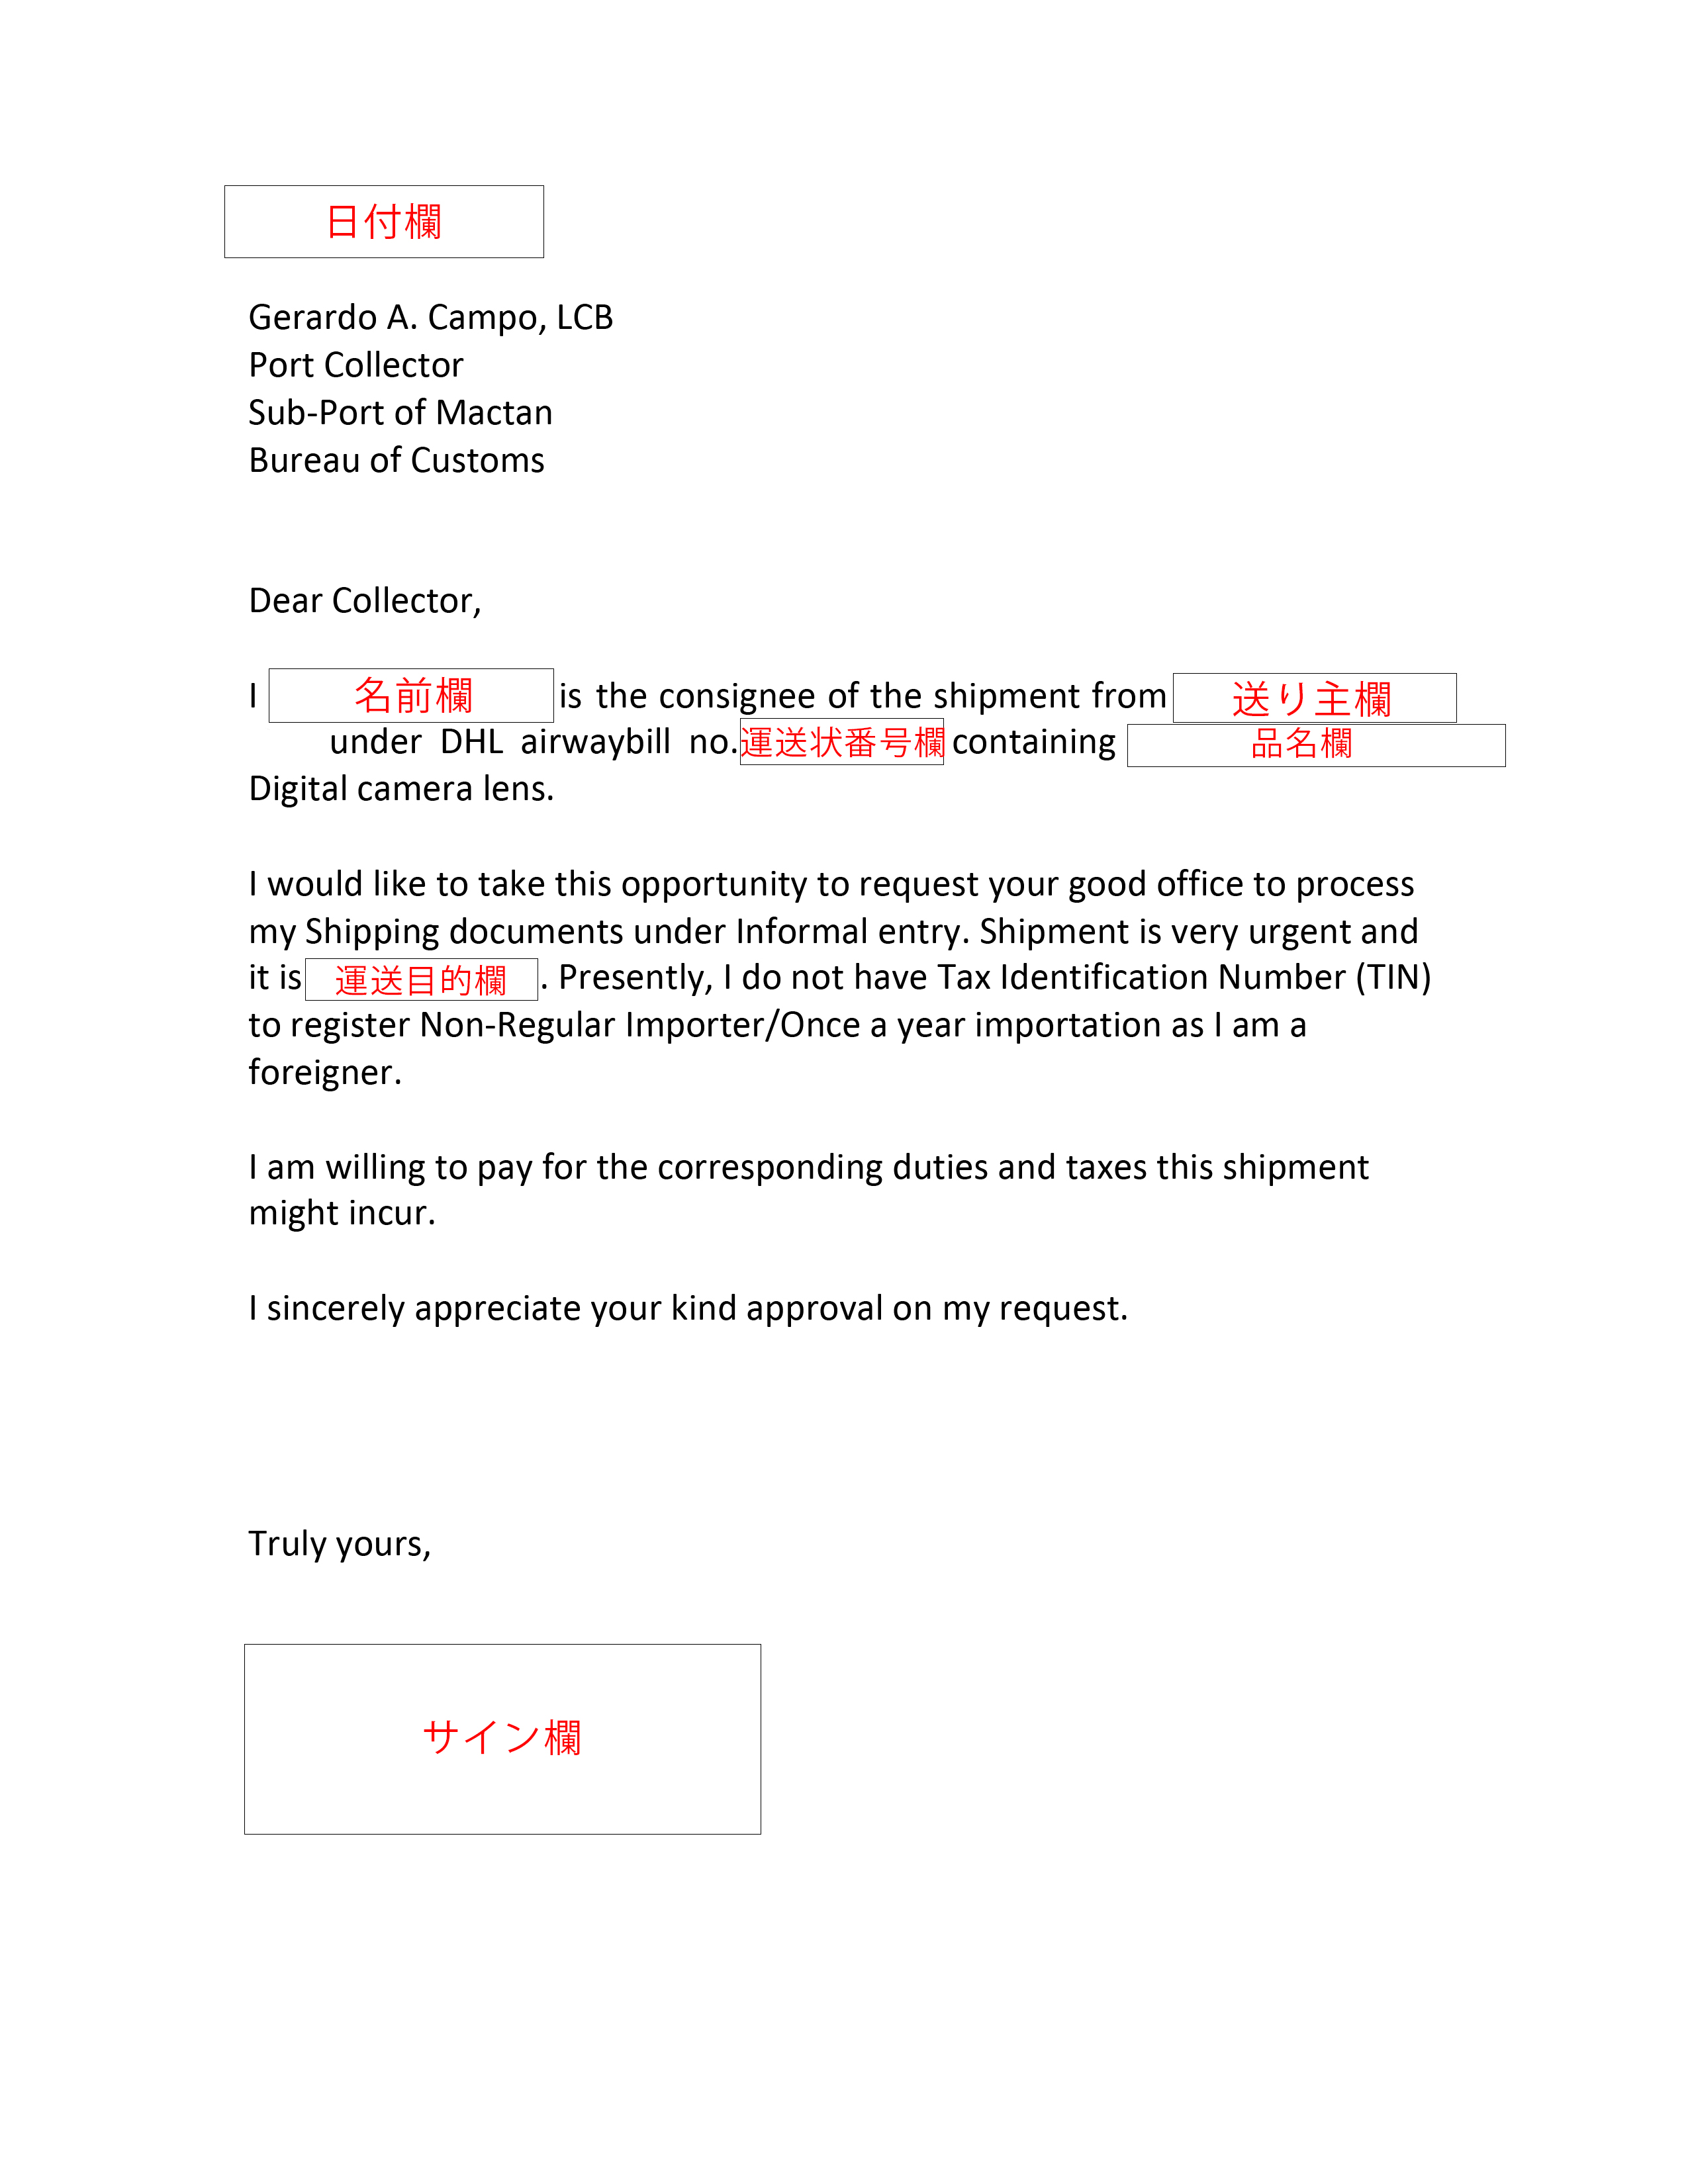 DHL request letter